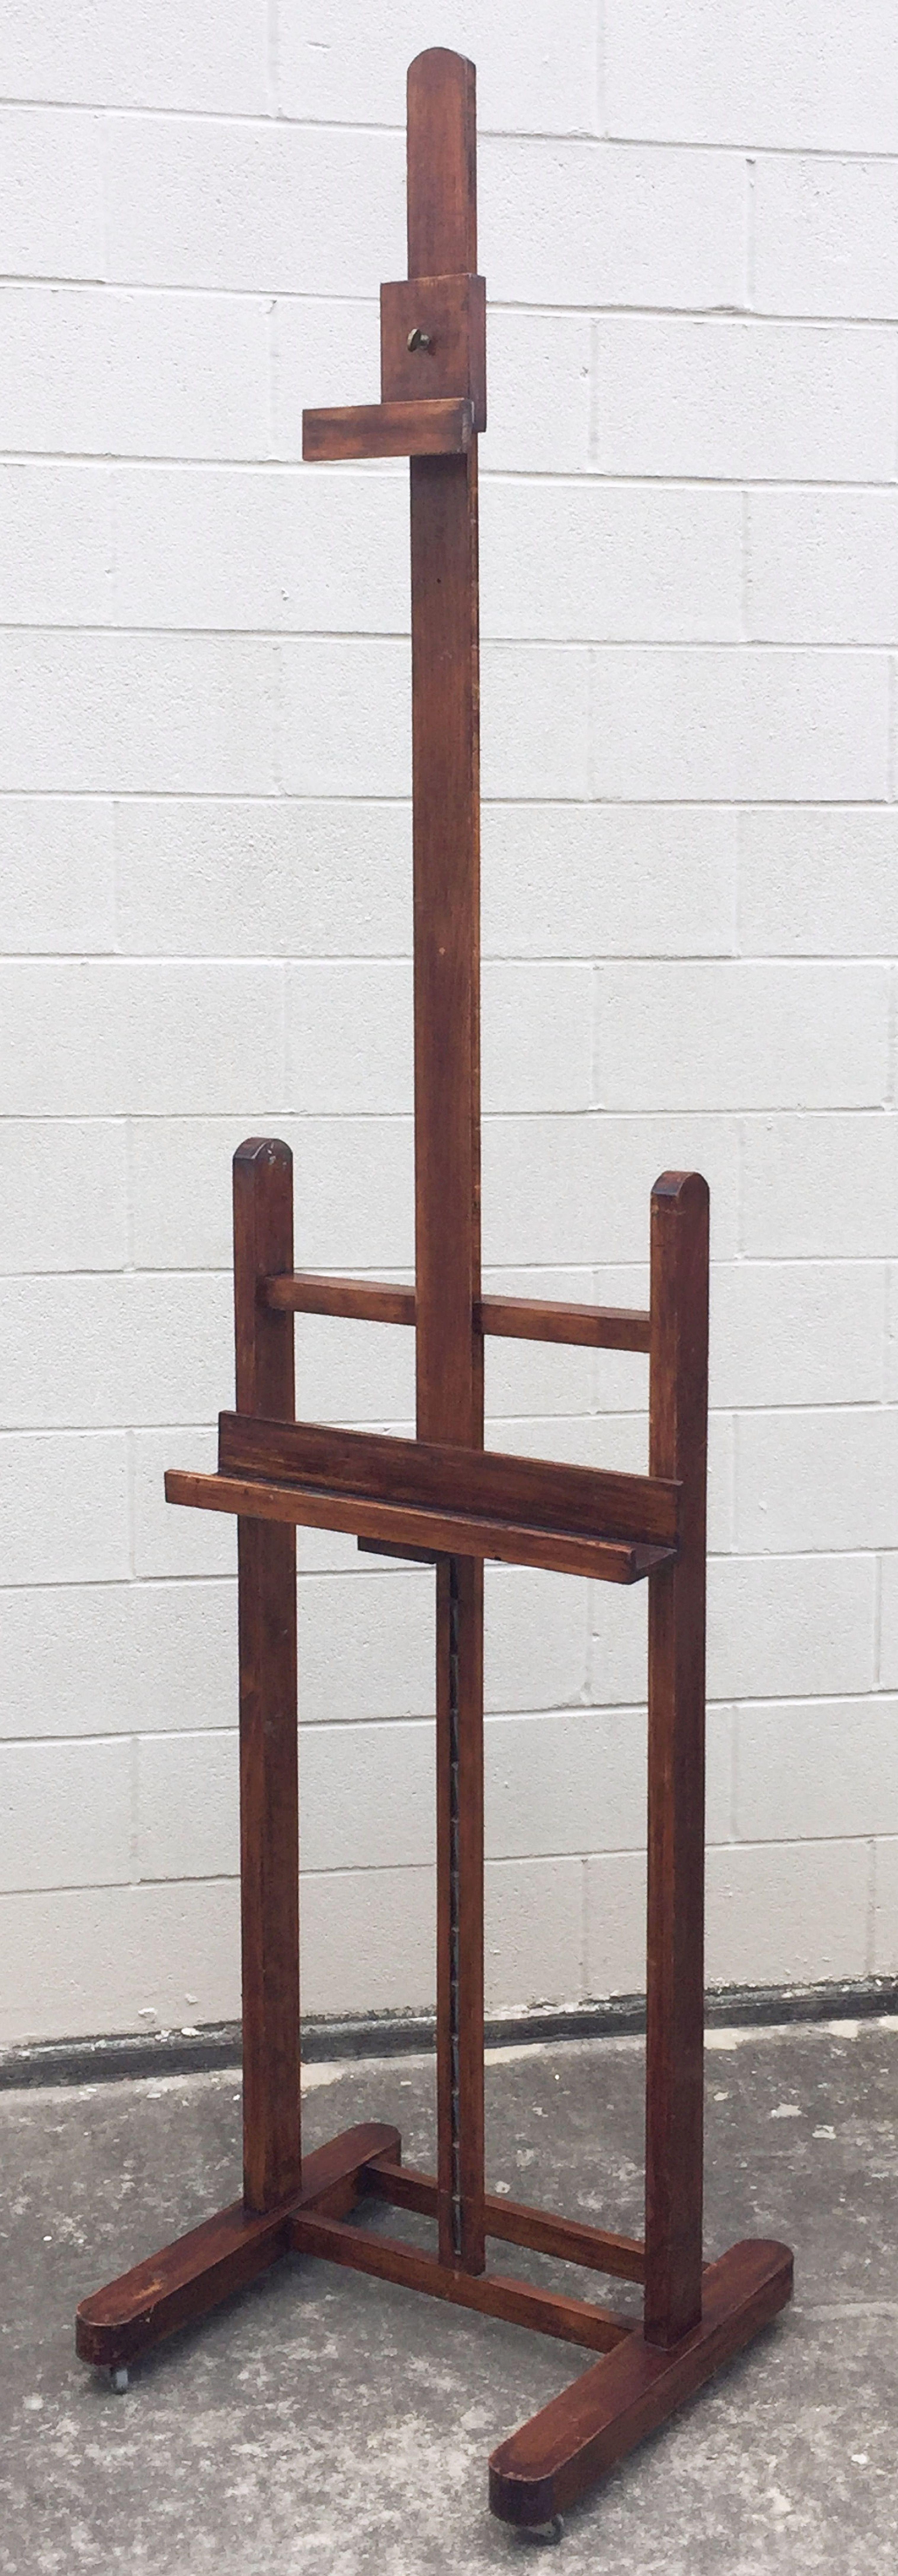 Large English Artist's Display or Floor Easel with Adjustable Tray 6